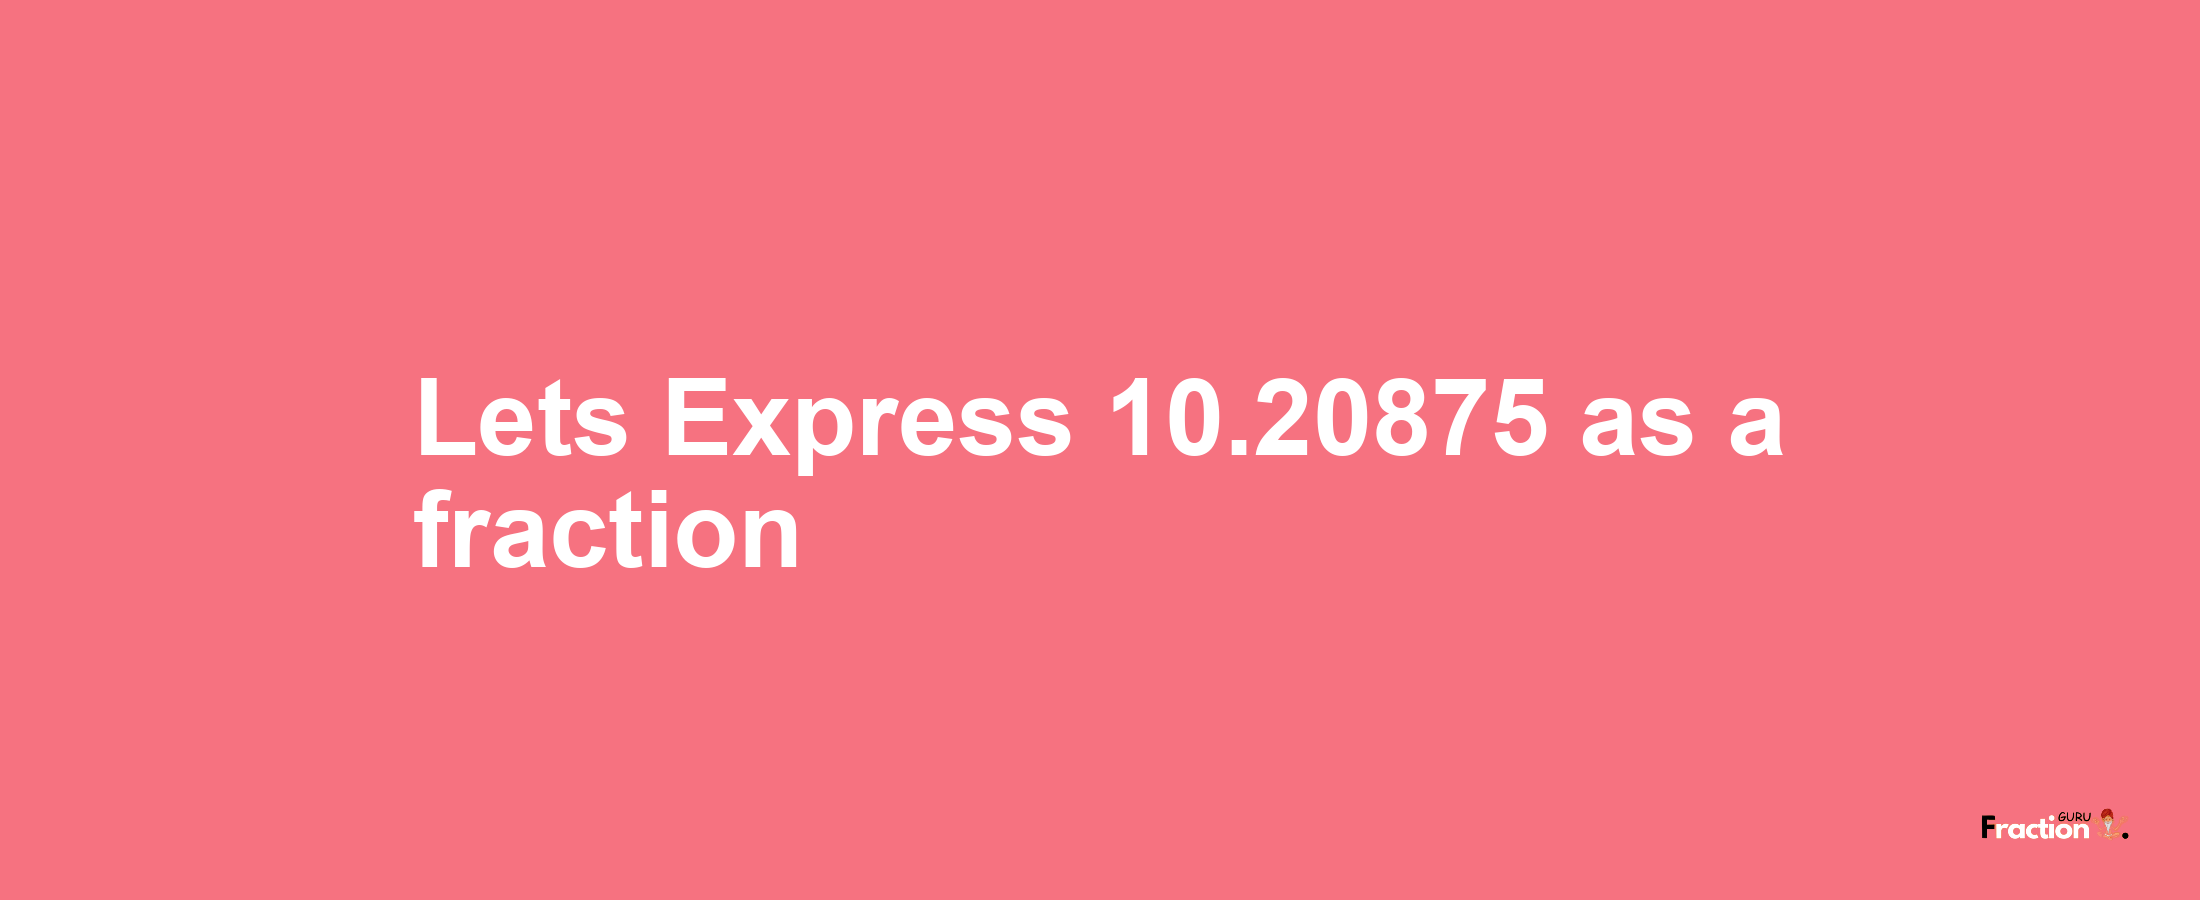 Lets Express 10.20875 as afraction